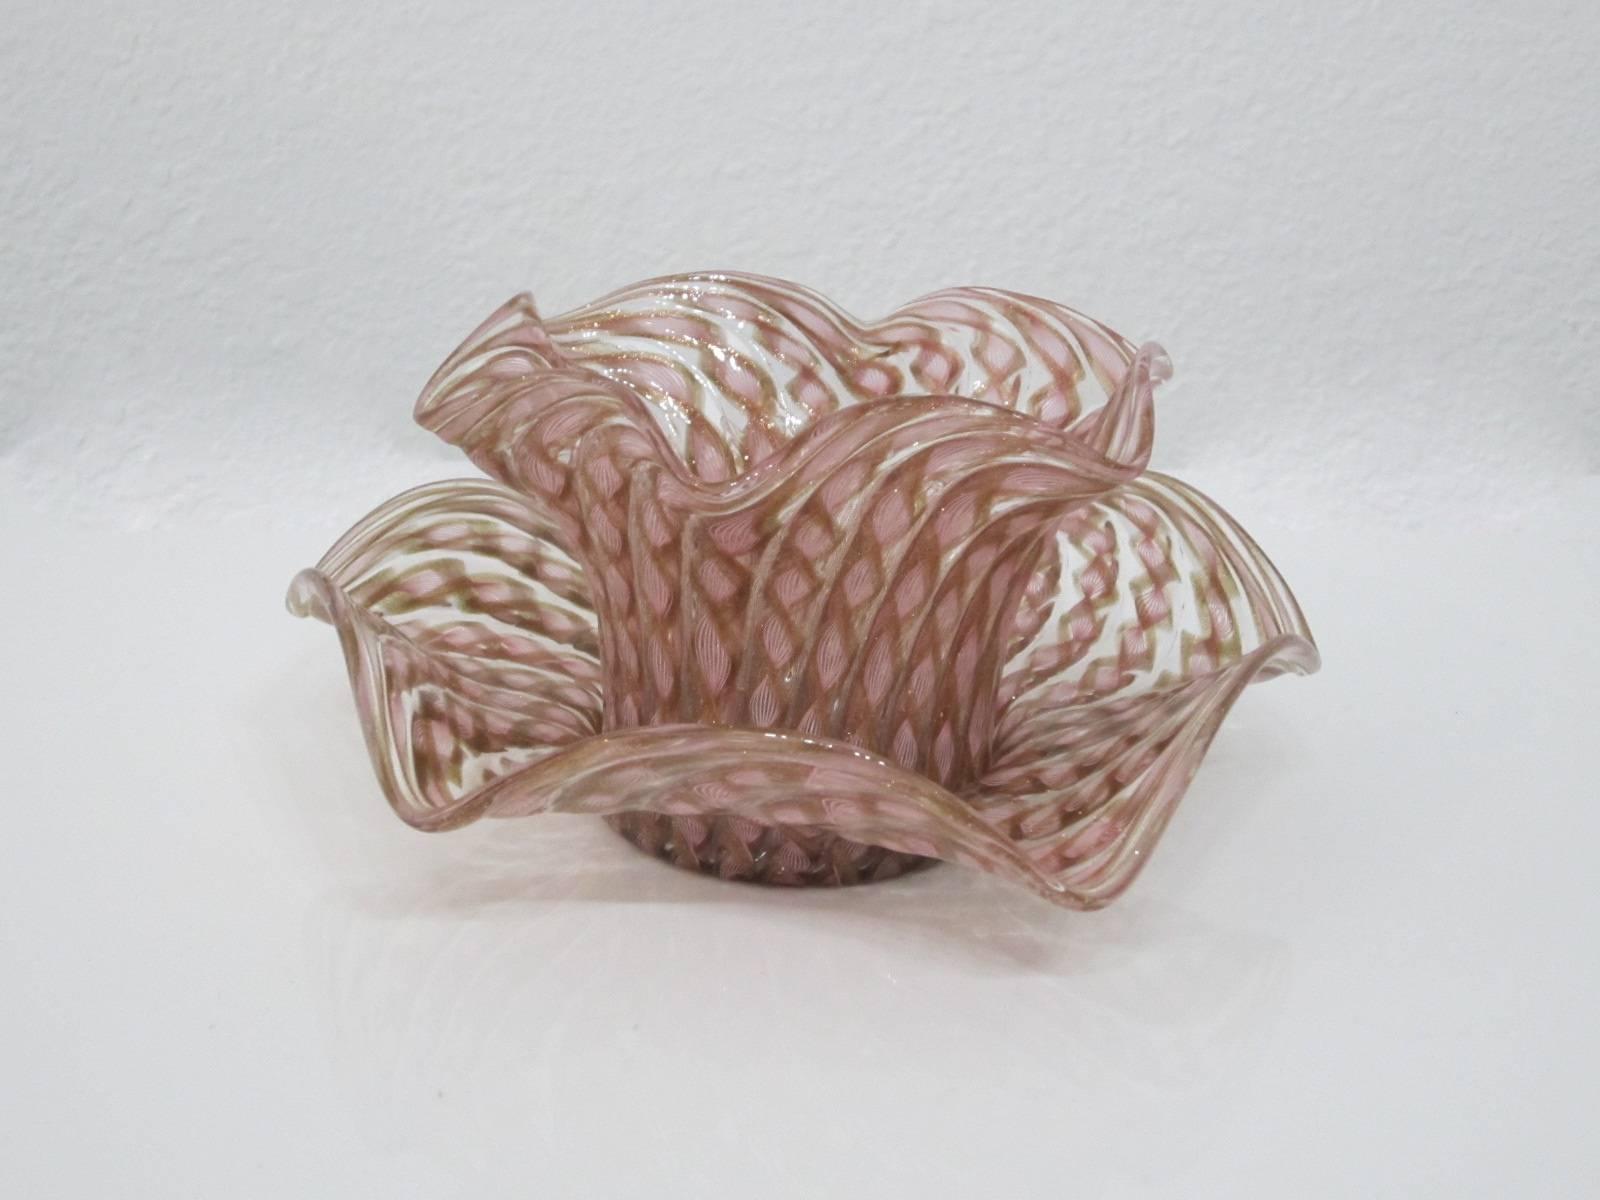 Beautiful handblown Murano glass latticing design scalloped bowl with saucer in pinks and copper.